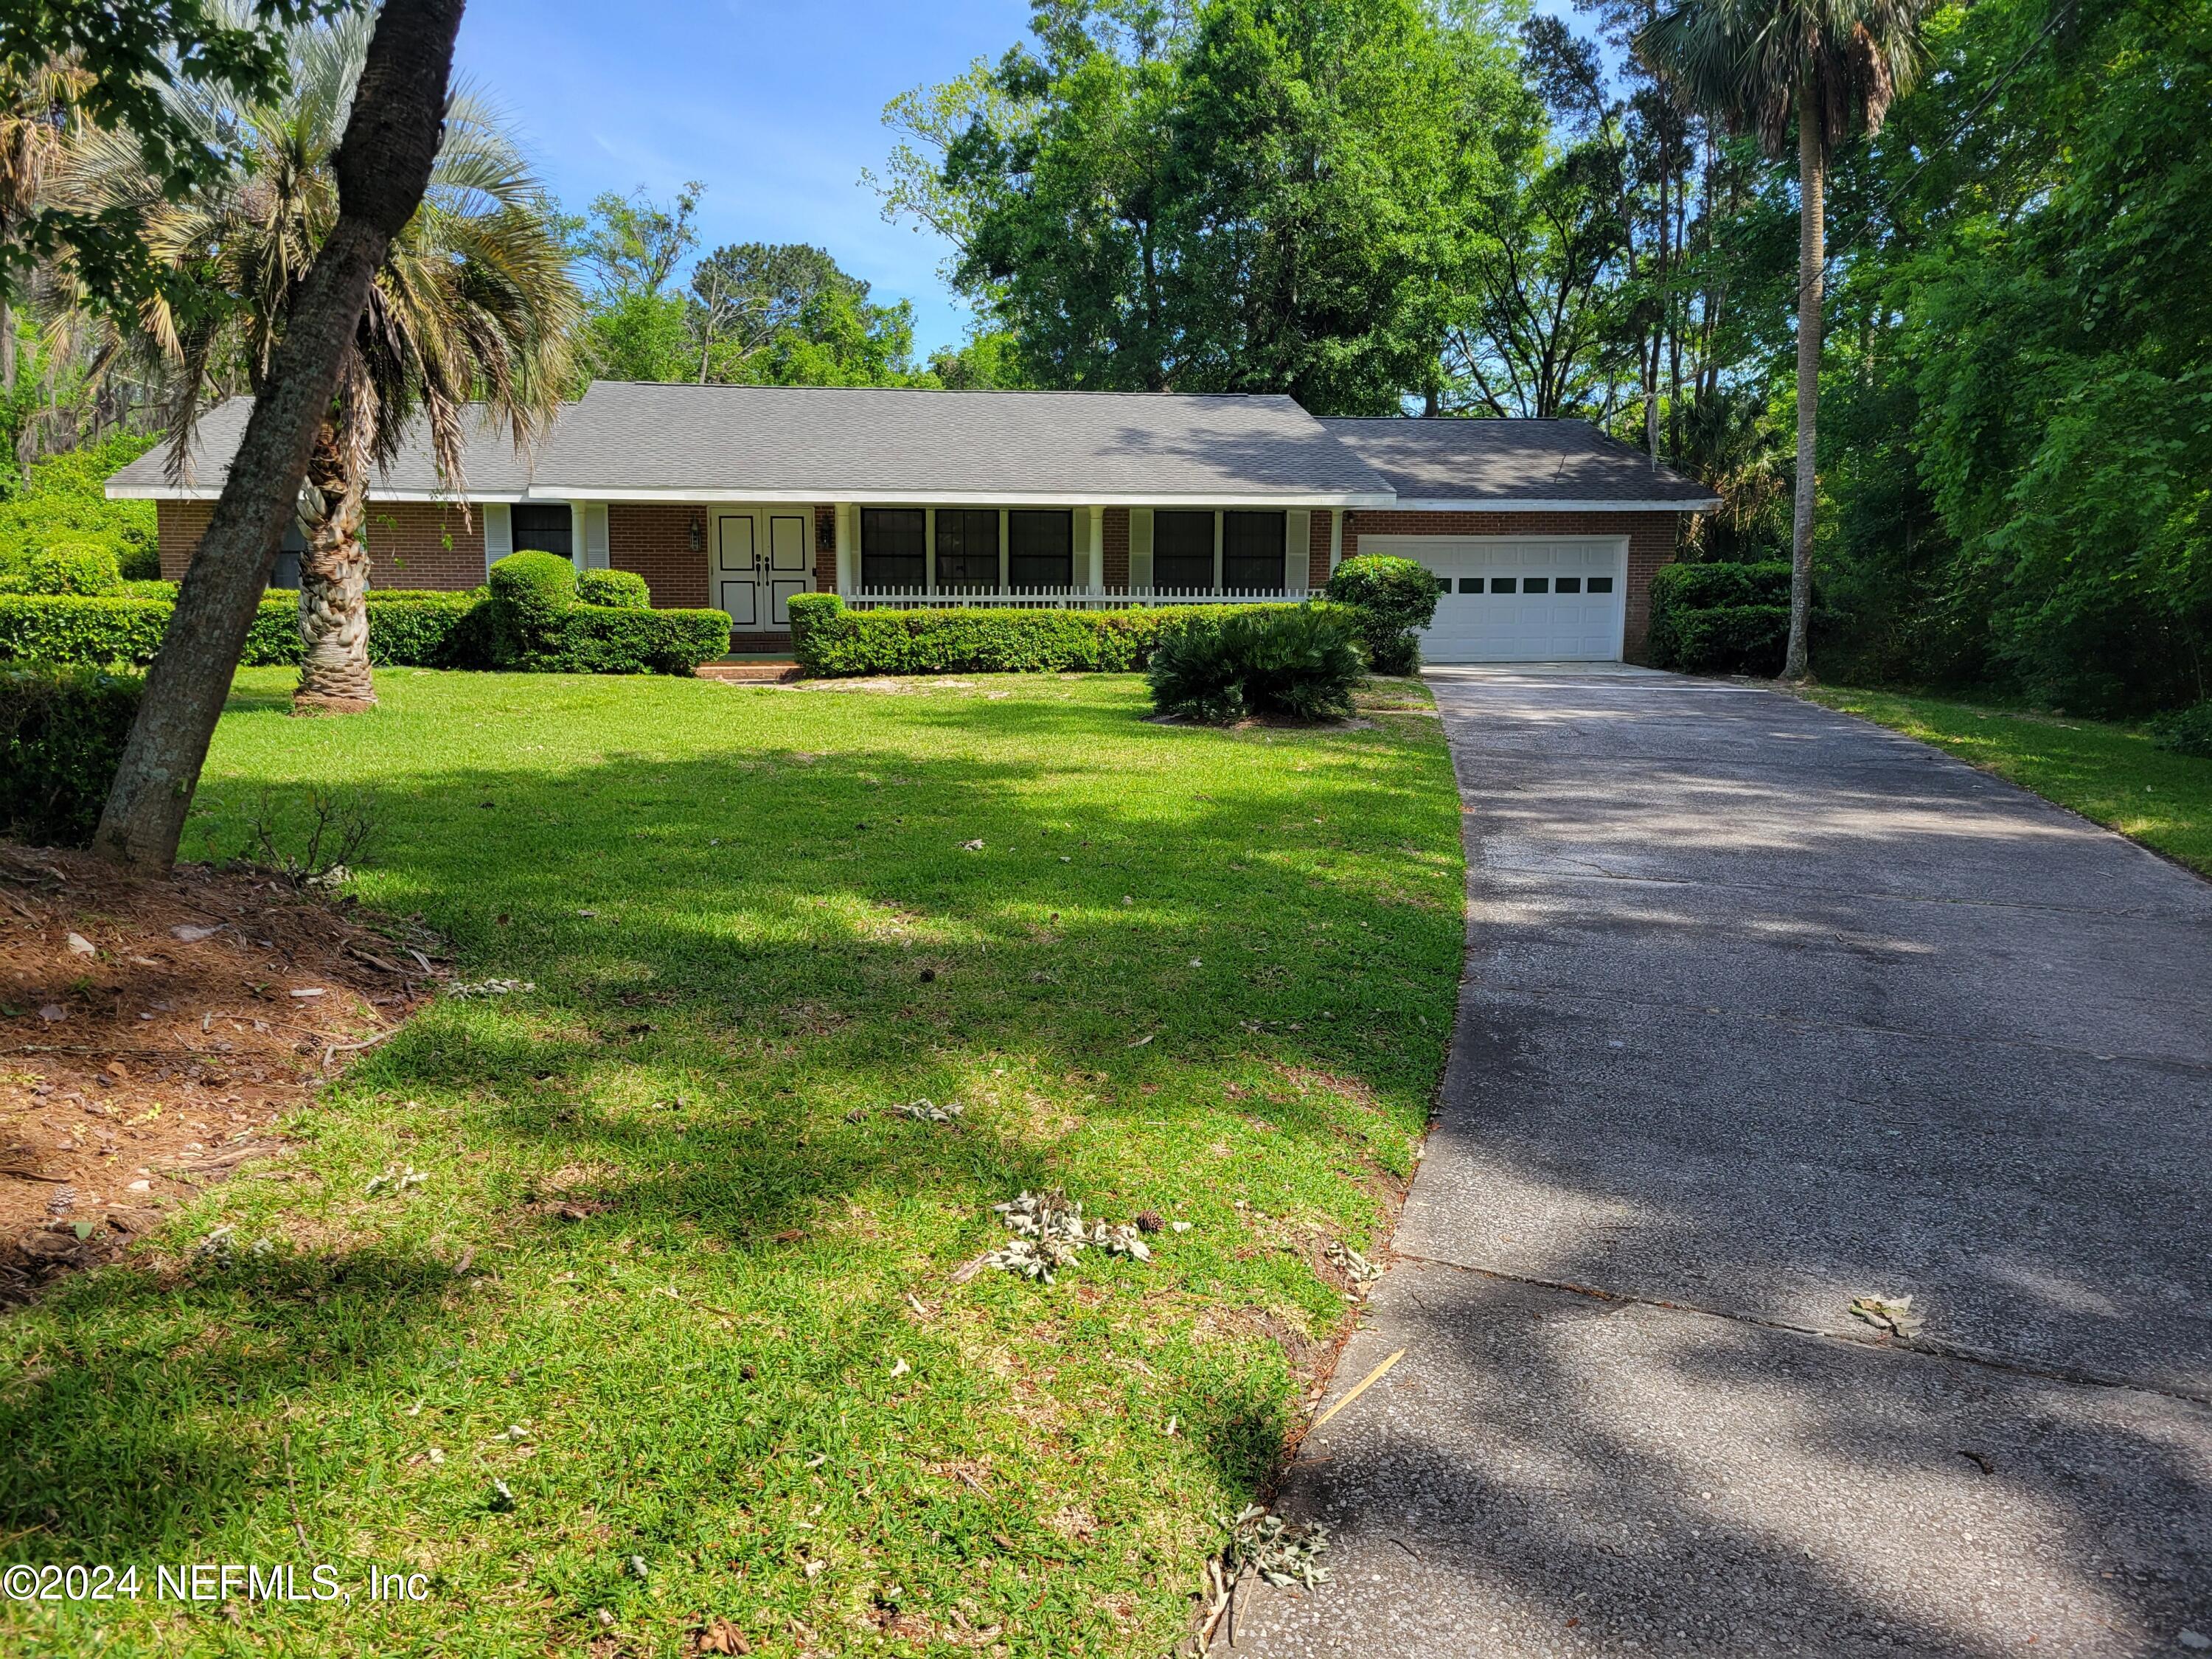 Jacksonville, FL home for sale located at 5842 S Thurgood Circle Unit 3, Jacksonville, FL 32219